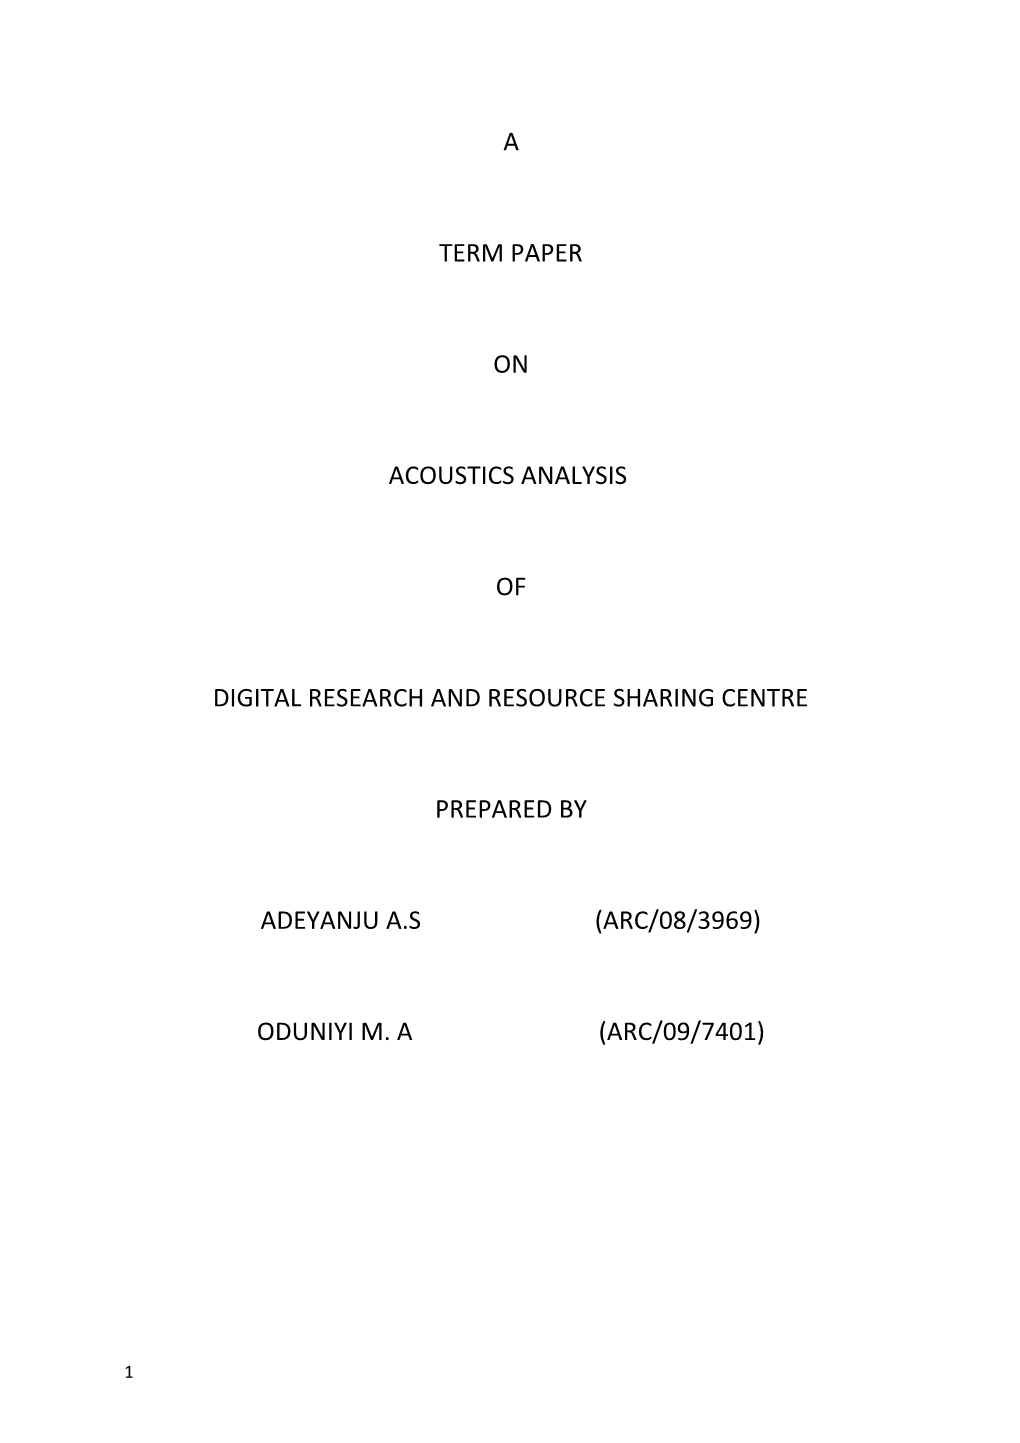 Digital Research and Resource Sharing Centre